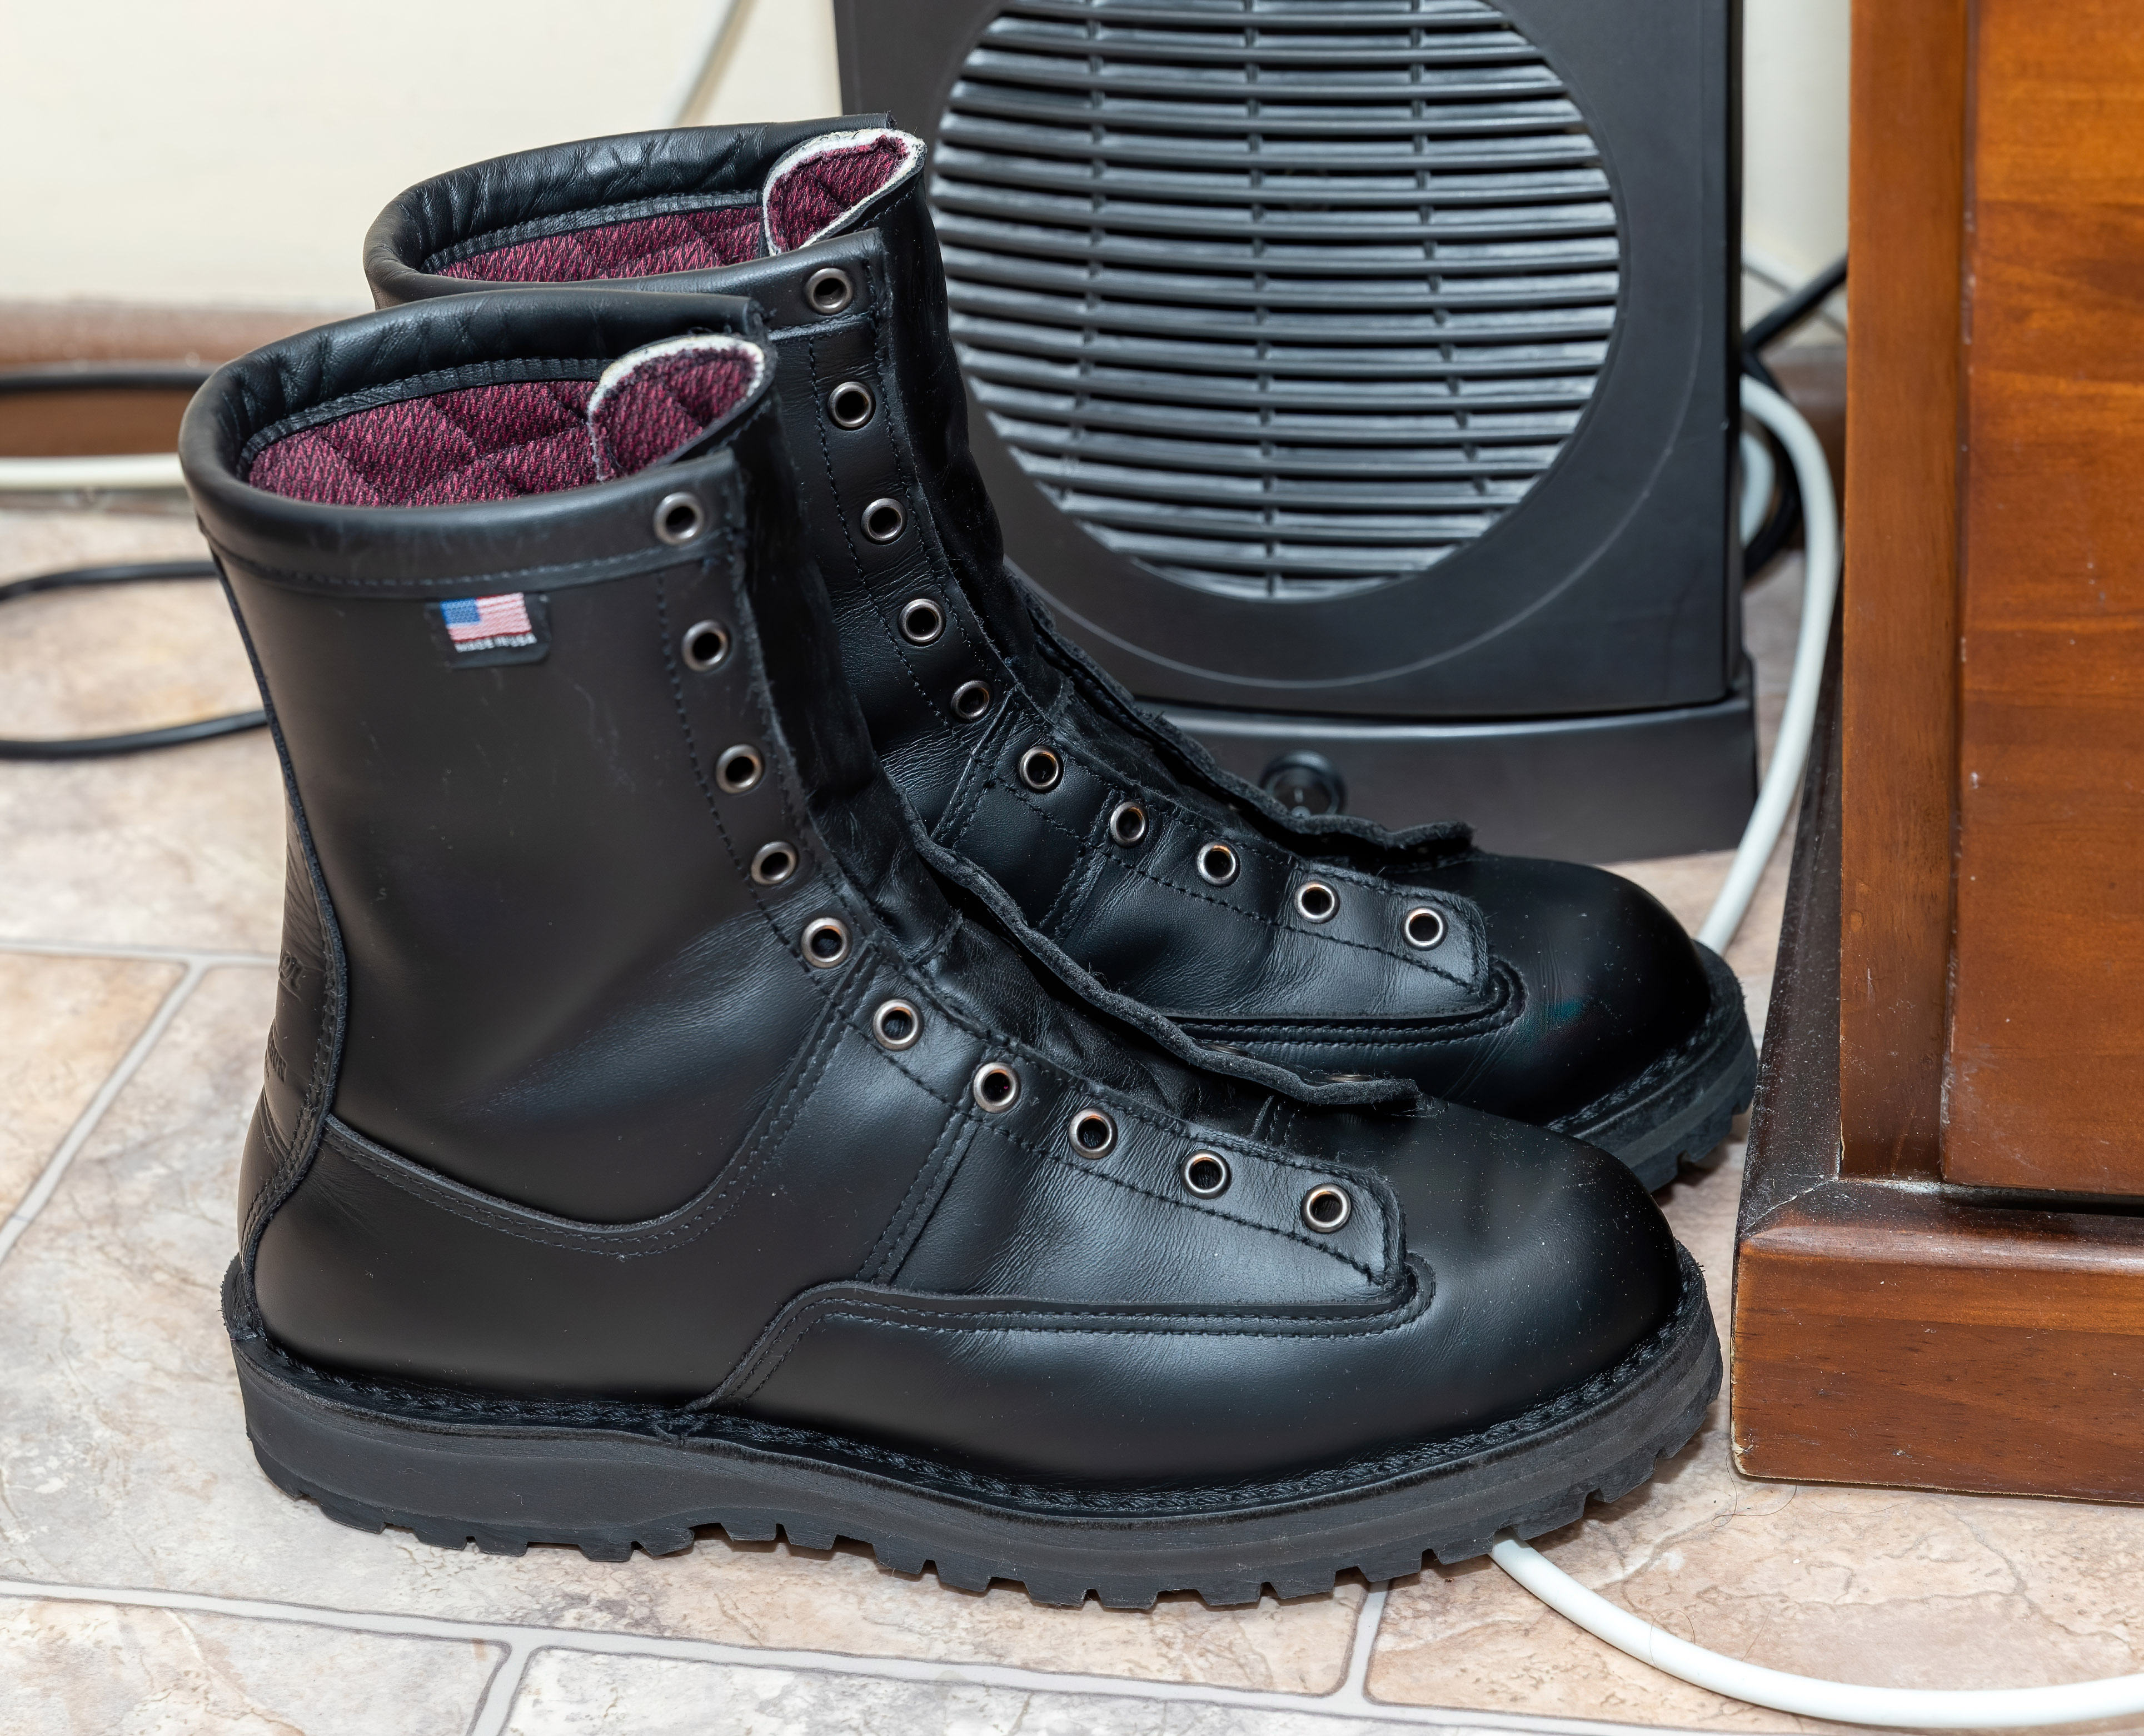 Danner Recon 8" Black 200G | The Photography Forum